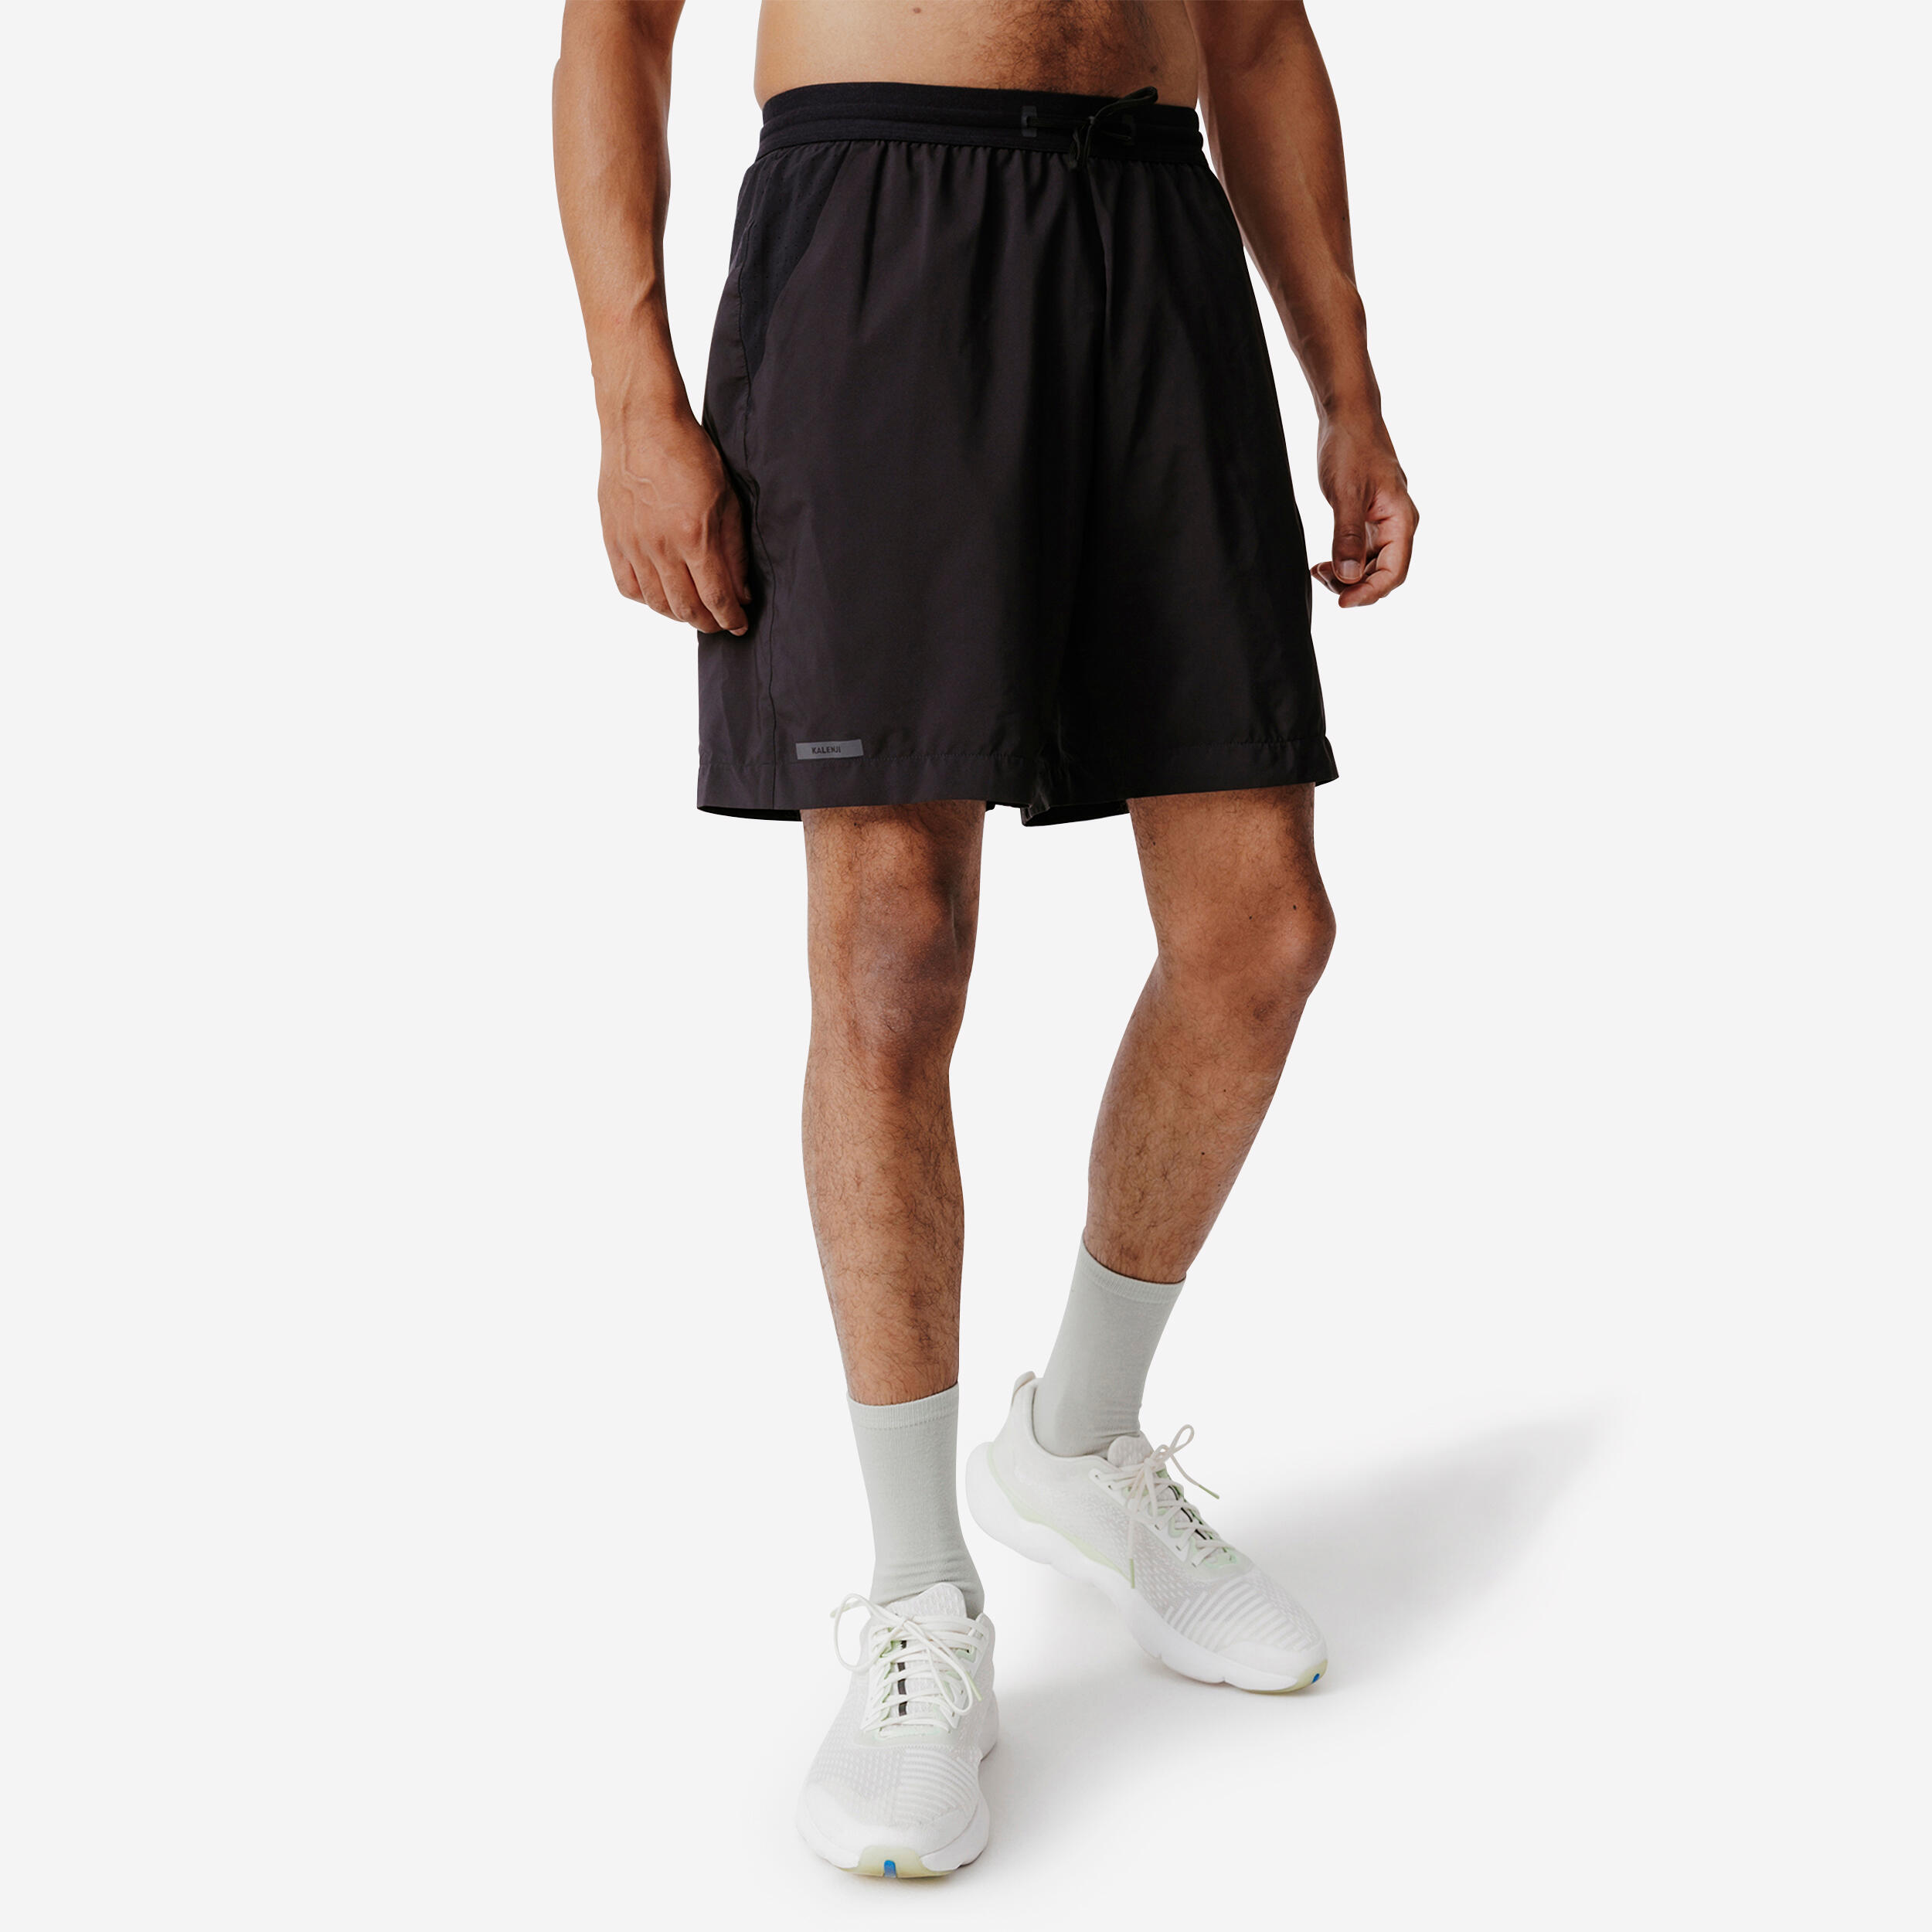 Gympower Lift 2 in 1 Shorts